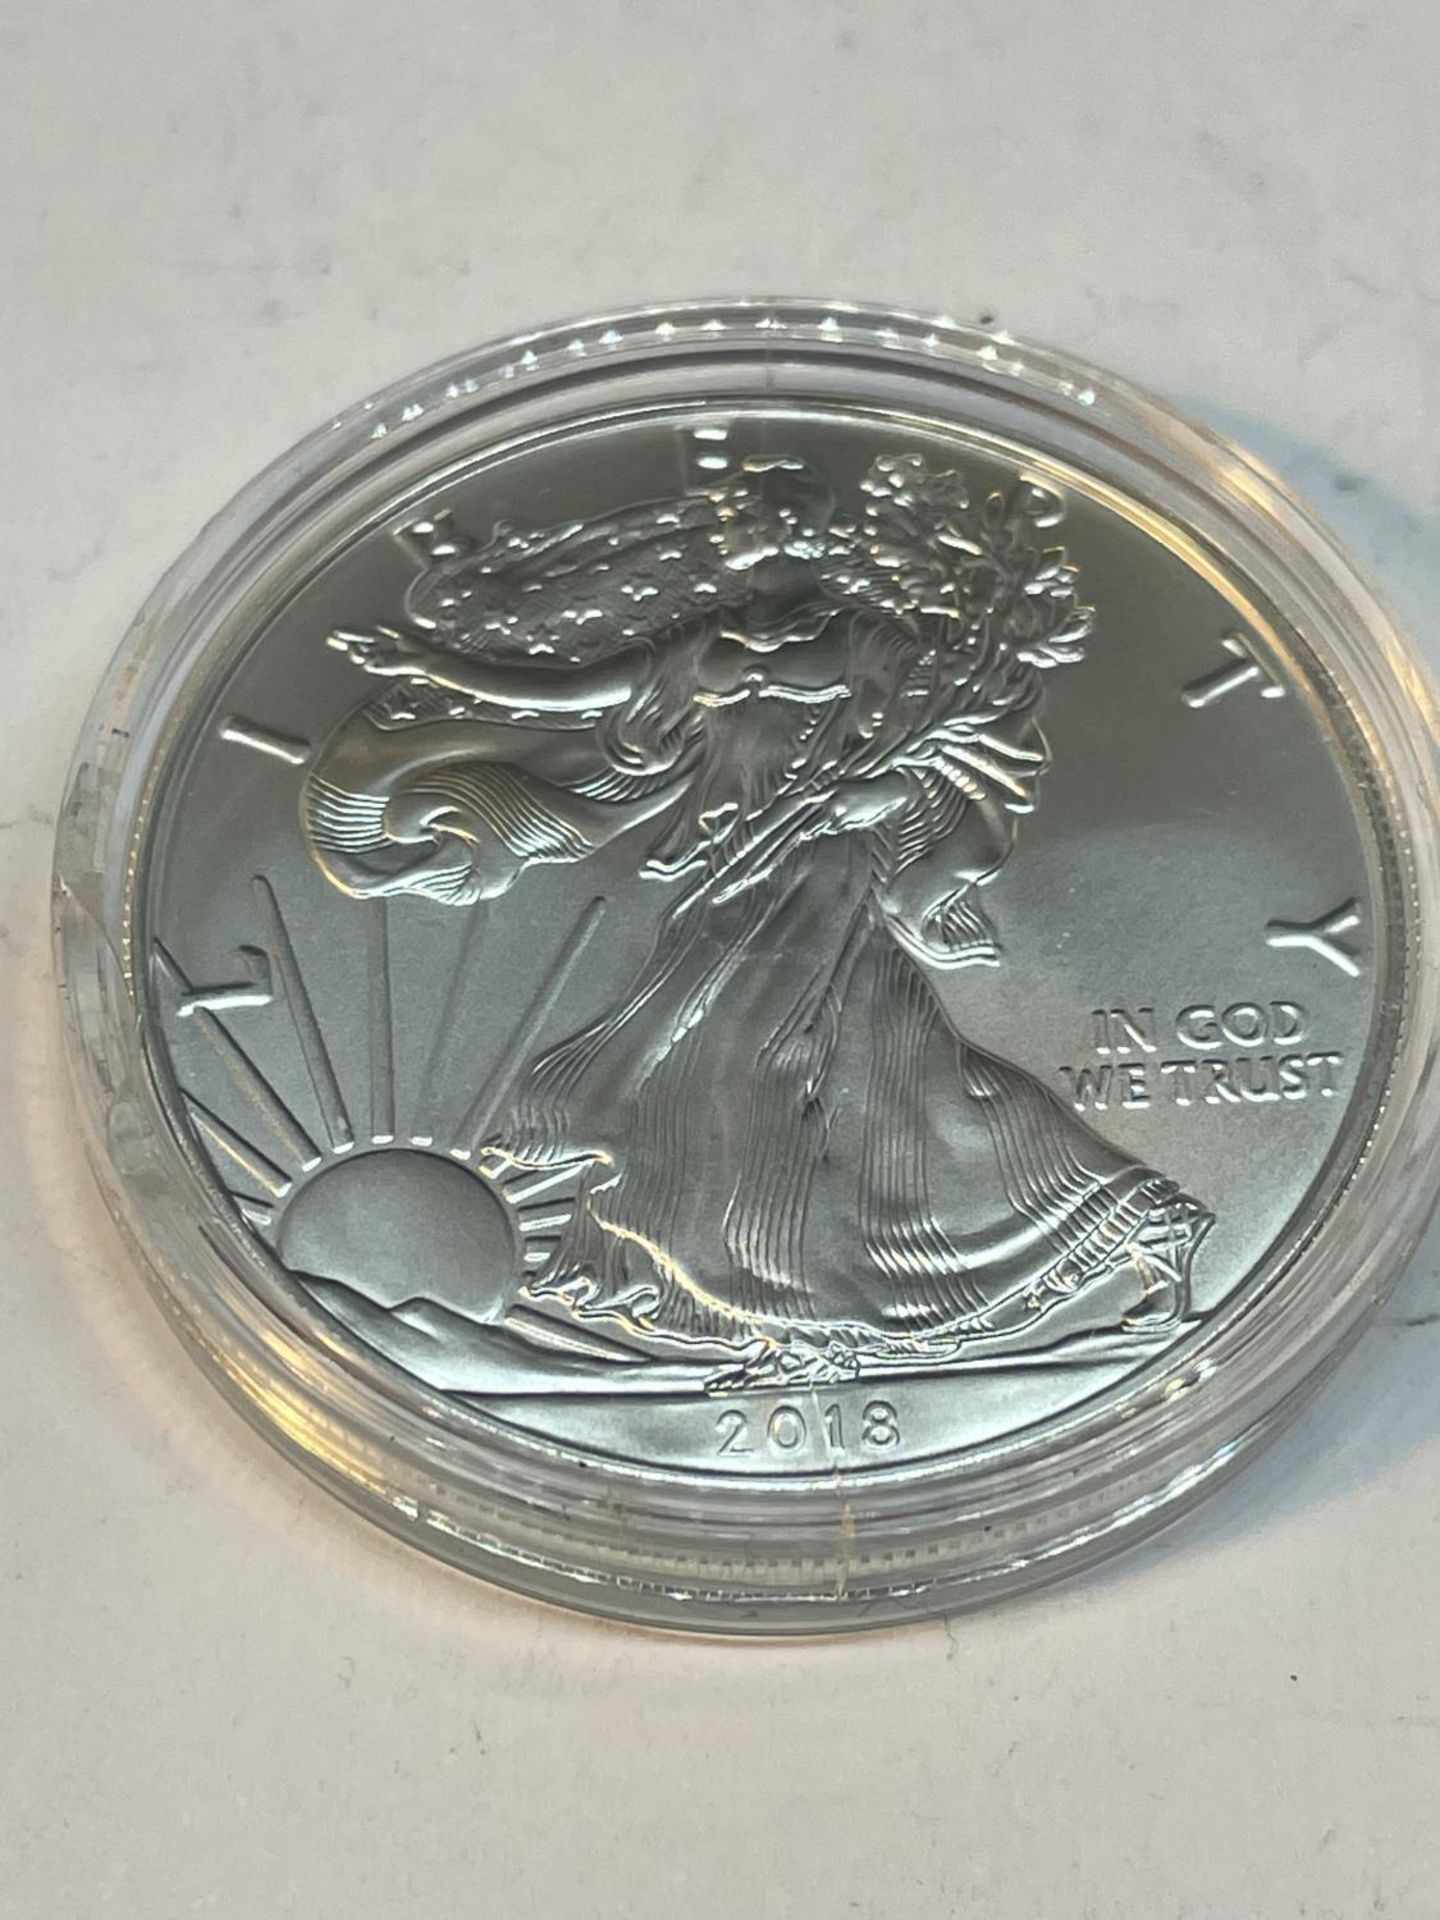 A SILVER PROOF ONE DOLLAR COIN IN A CAPSULE - Image 2 of 3